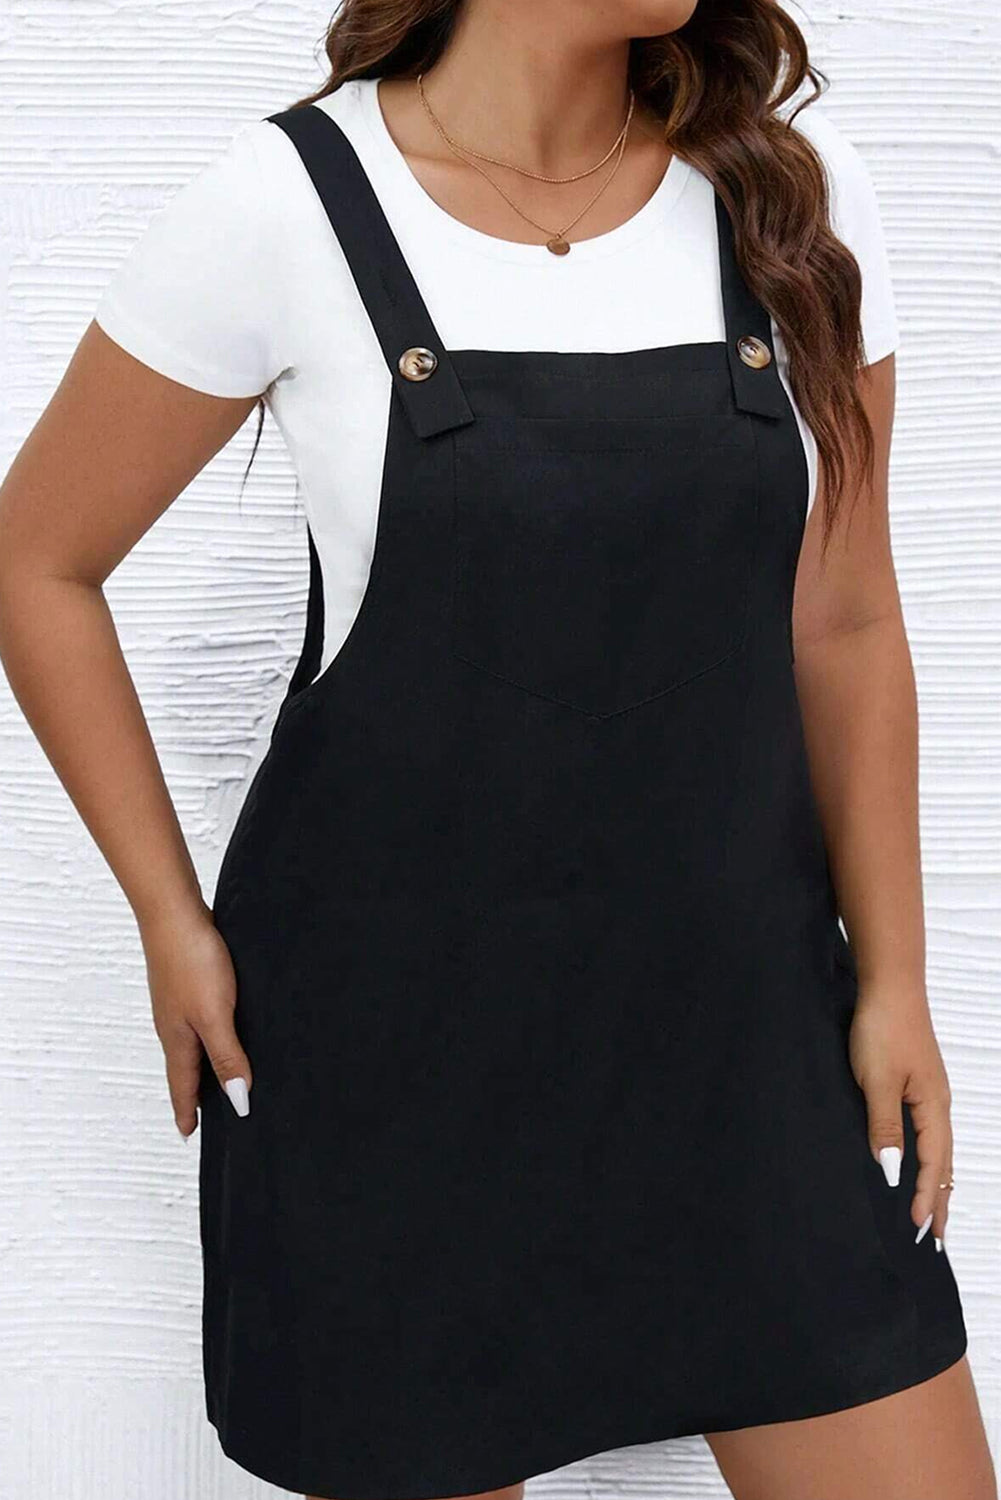 Black Plus Size Overall Dress with Buttoned Straps